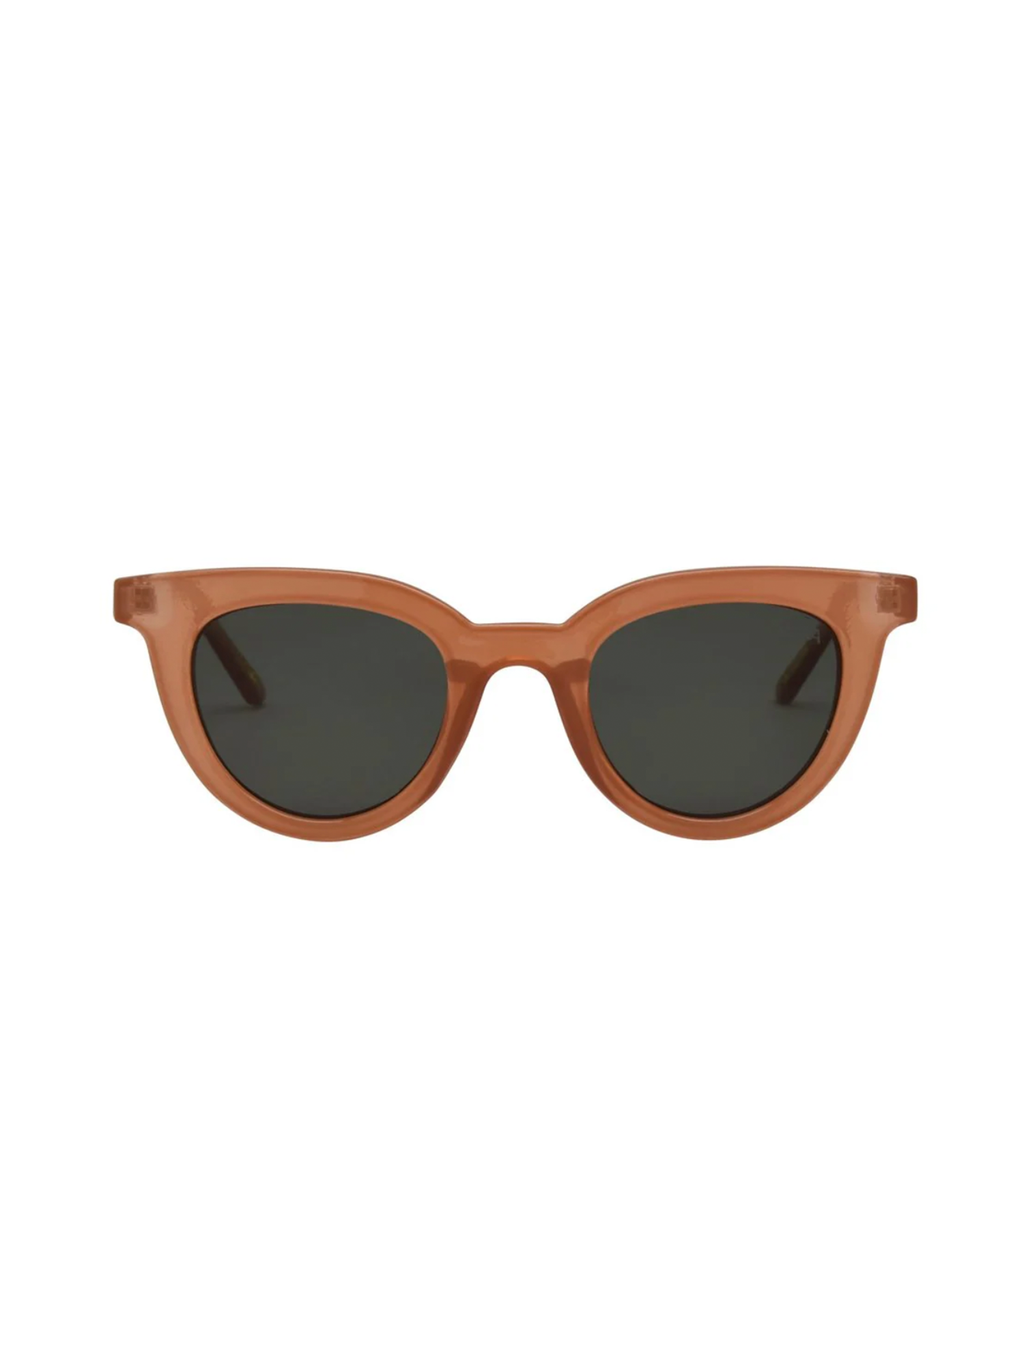 Canyon Sunnies in Maple/ Green - Stitch And Feather